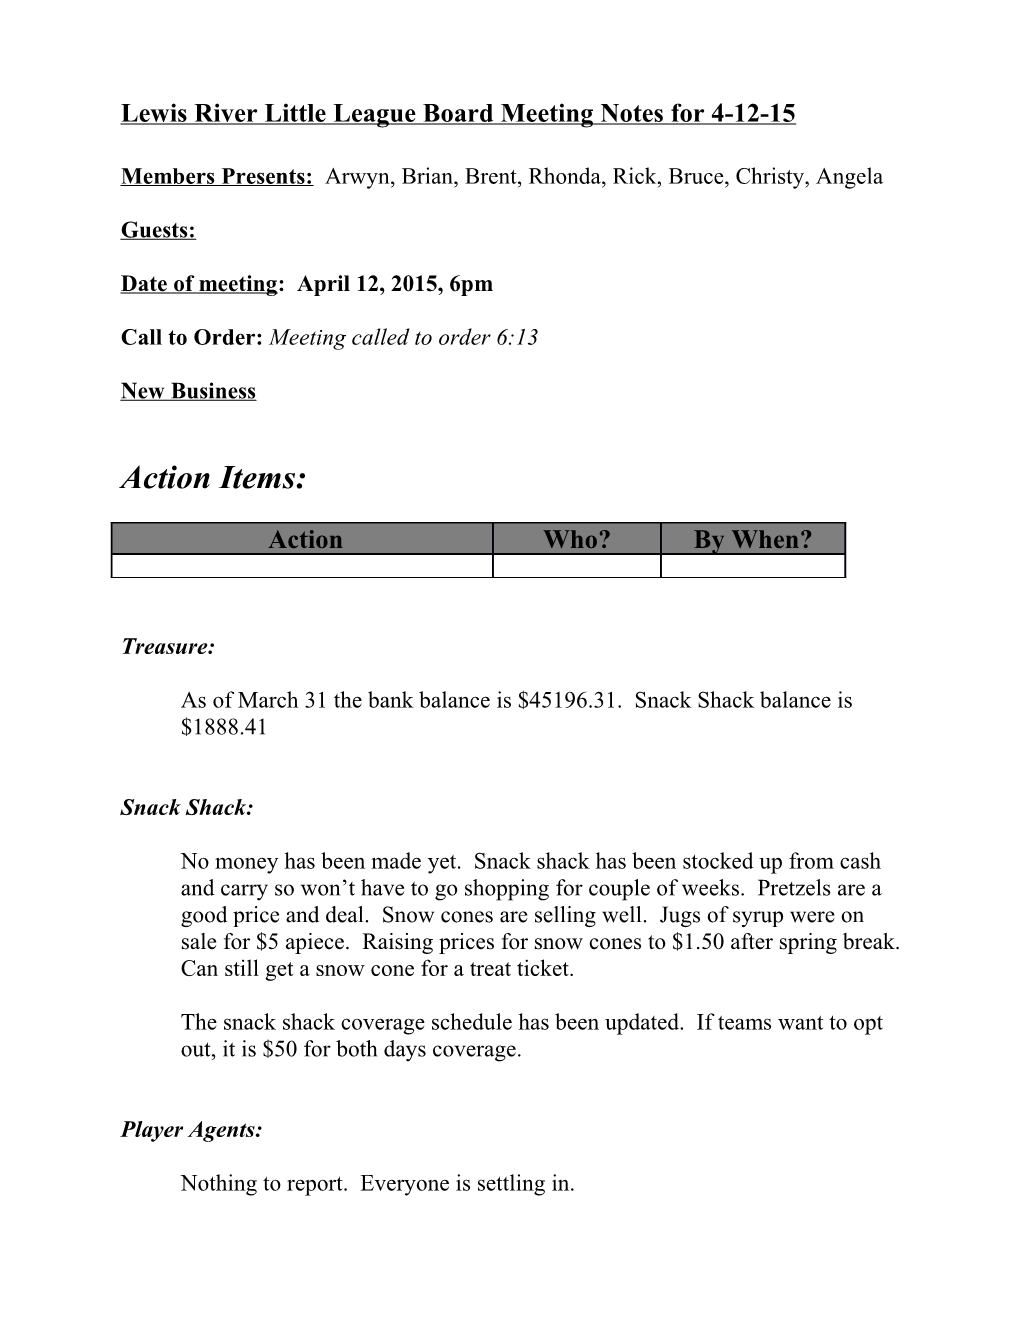 Lewis River Little League Board Meeting Notes for 4-12-15